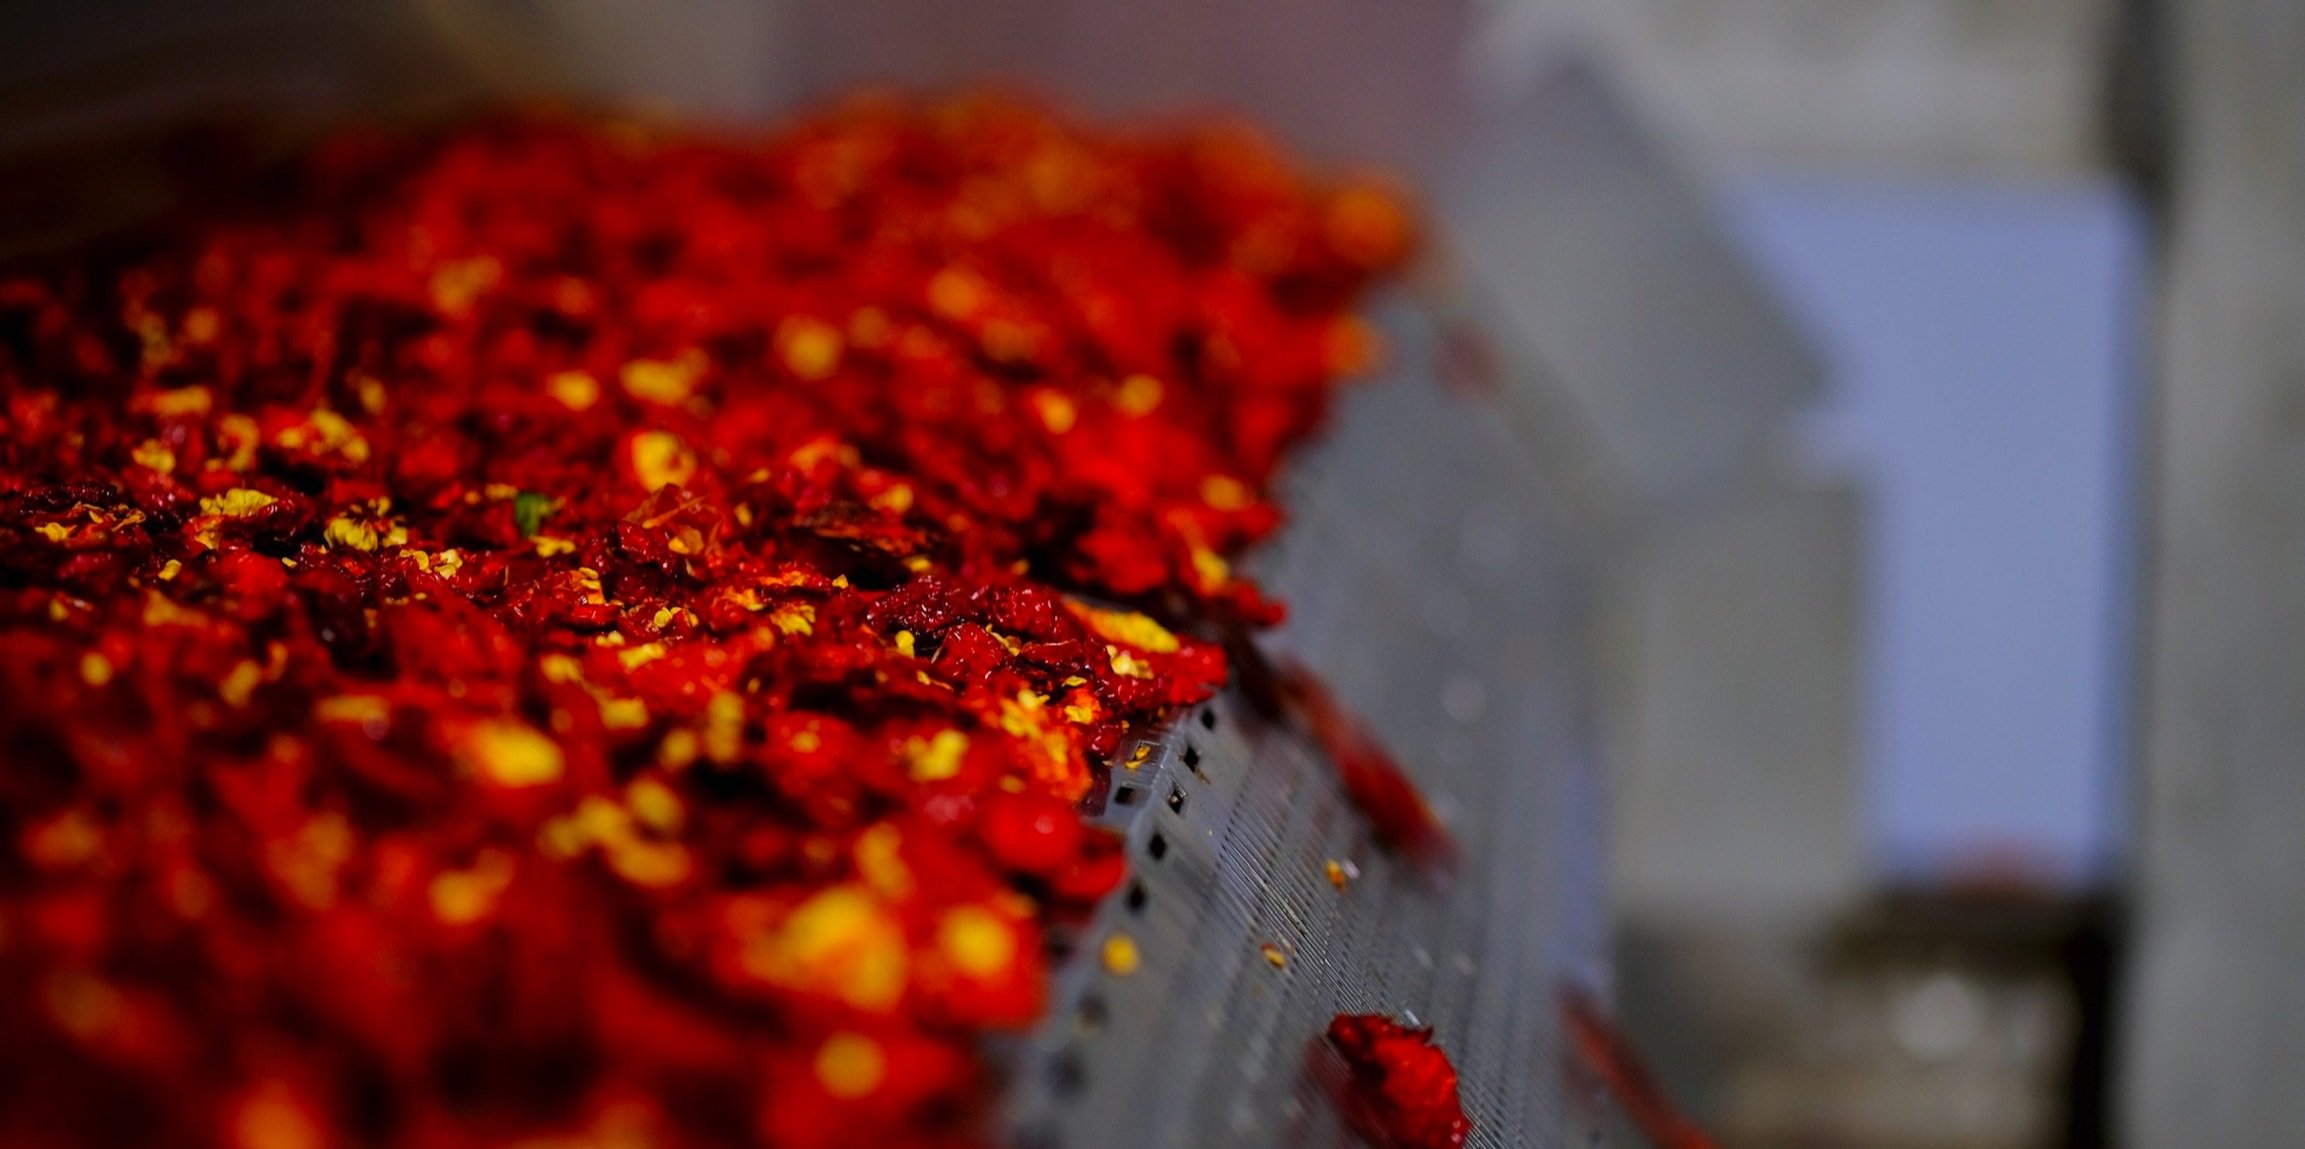 The King of Spicy: All about the Carolina Reaper